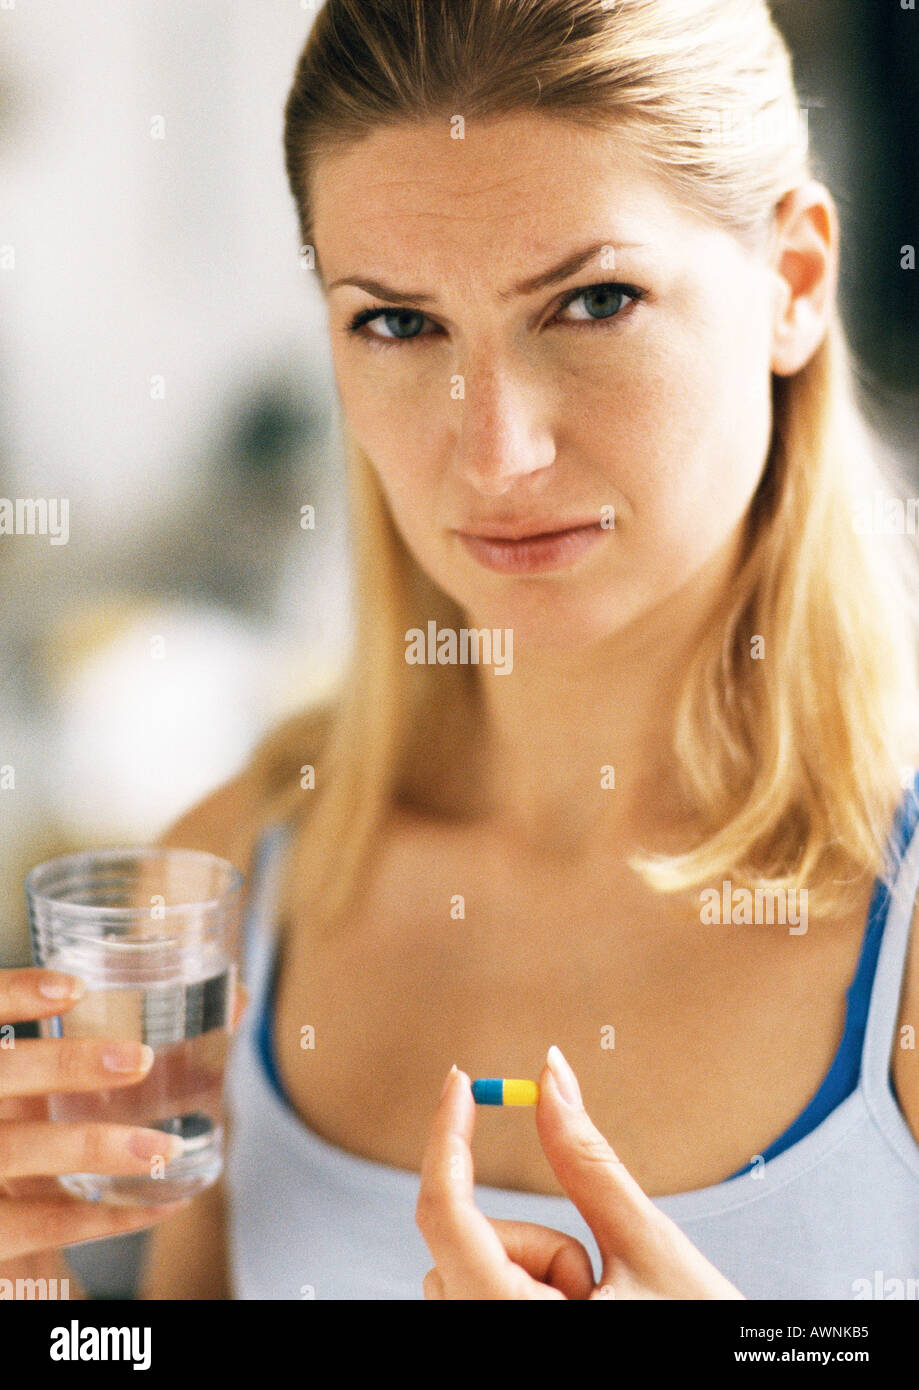 Woman holding pill and glass, looking at camera. Stock Photo